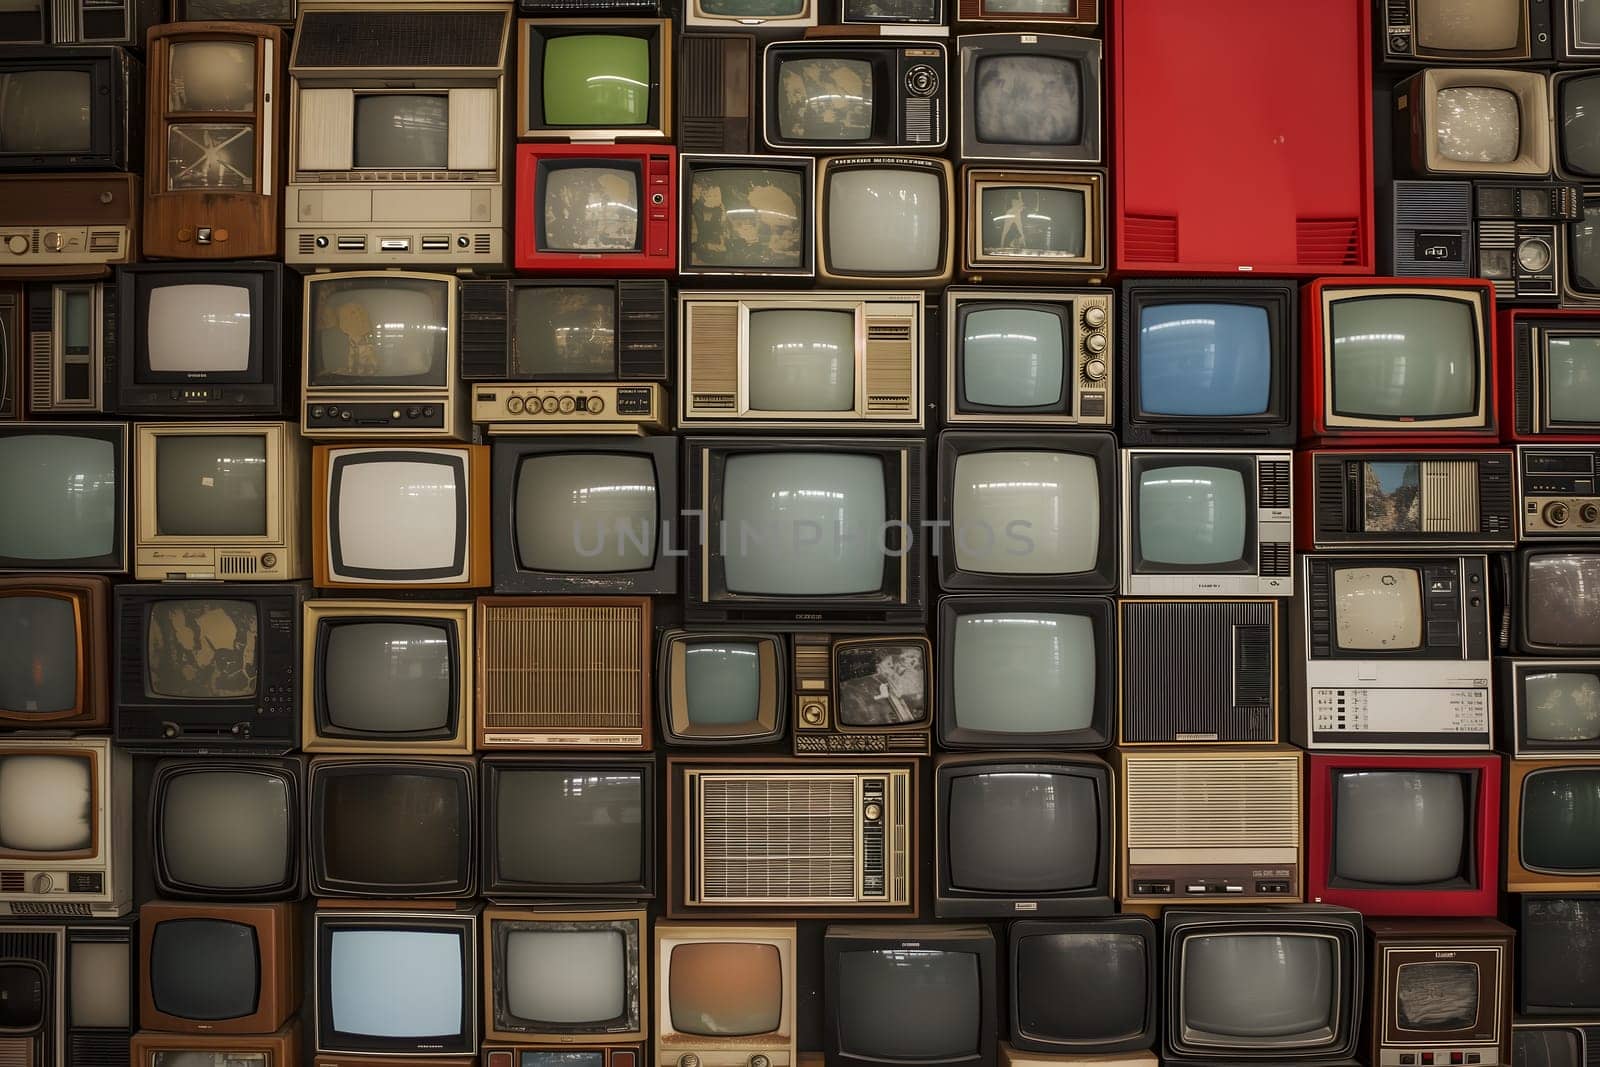 Many old analog tv sets stacked along the wall. by z1b